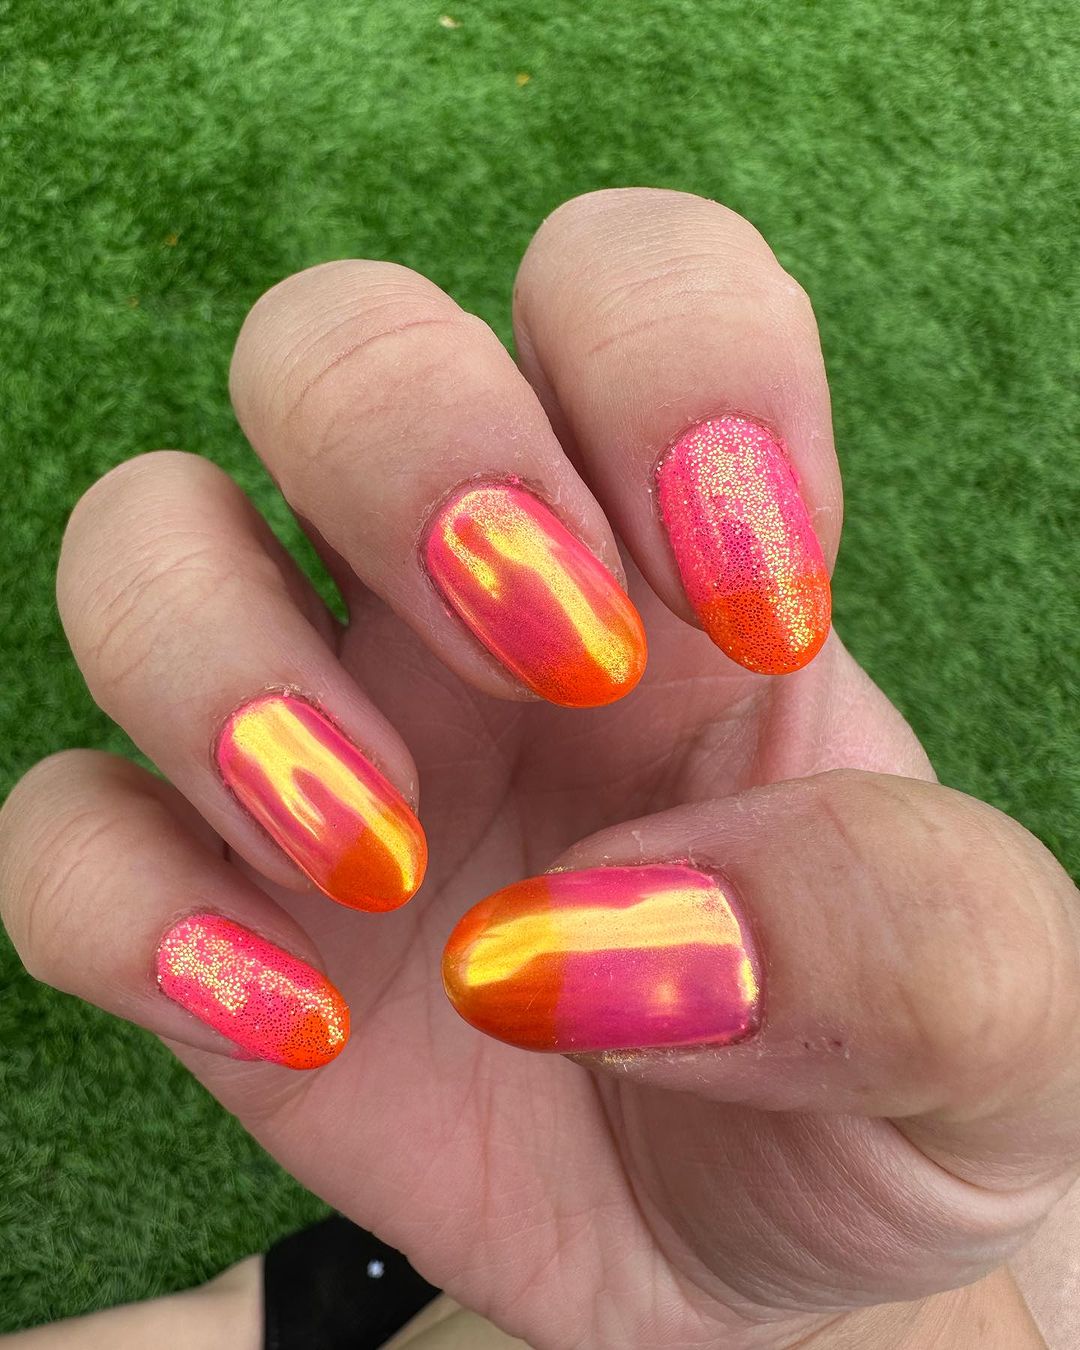 Orange and Pink Nails With Glitter